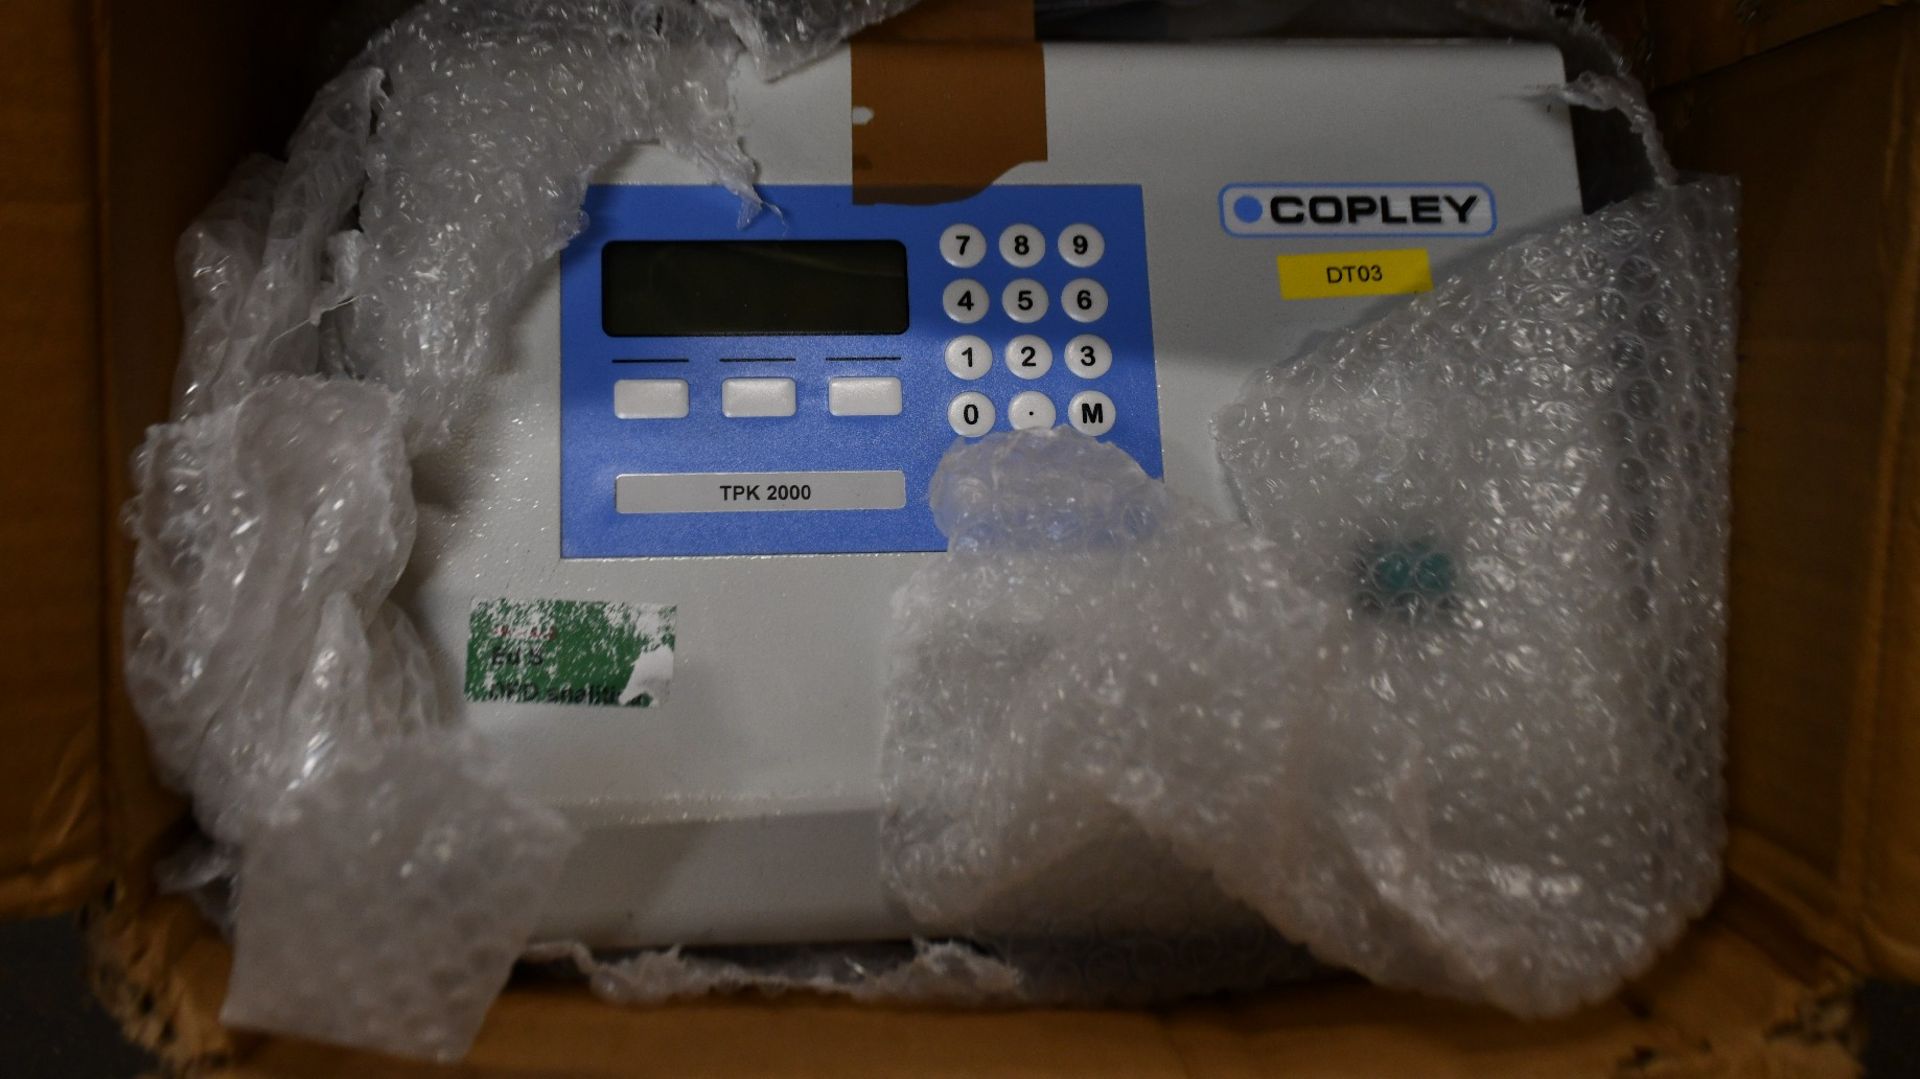 A pre-owned Copley TPK 2000 critical flow controller (Item is untested).